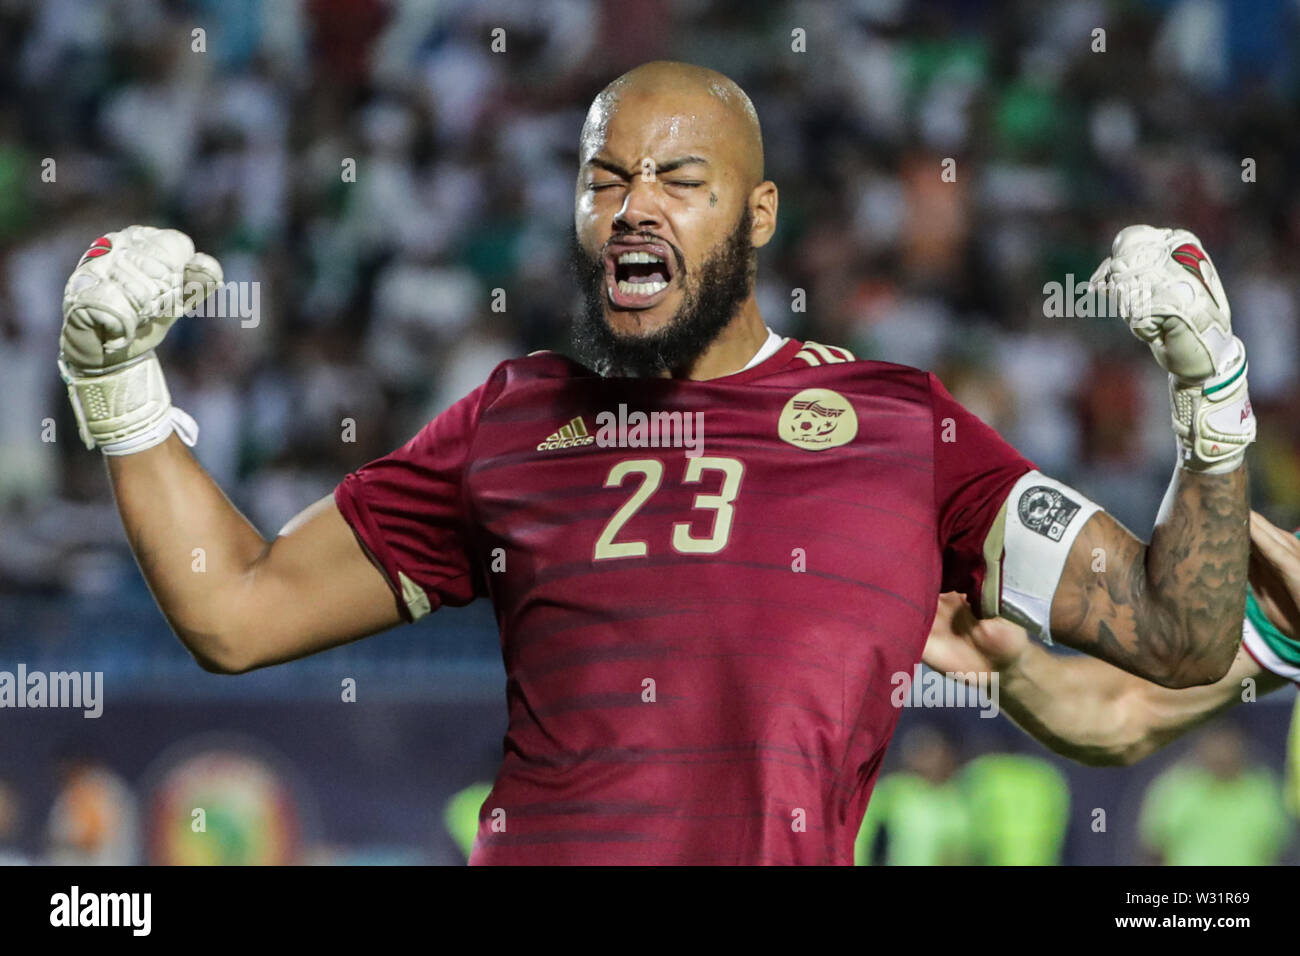 Suez, Egypt. 11th July, 2019. Algeria's Rais M'Bolhi celebrates after the final whistle of the 2019 Africa Cup of Nations quarter final soccer match between Cote d'Ivoire and Algeria at the Suez Sports Stadium. Credit: Oliver Weiken/dpa/Alamy Live News Stock Photo